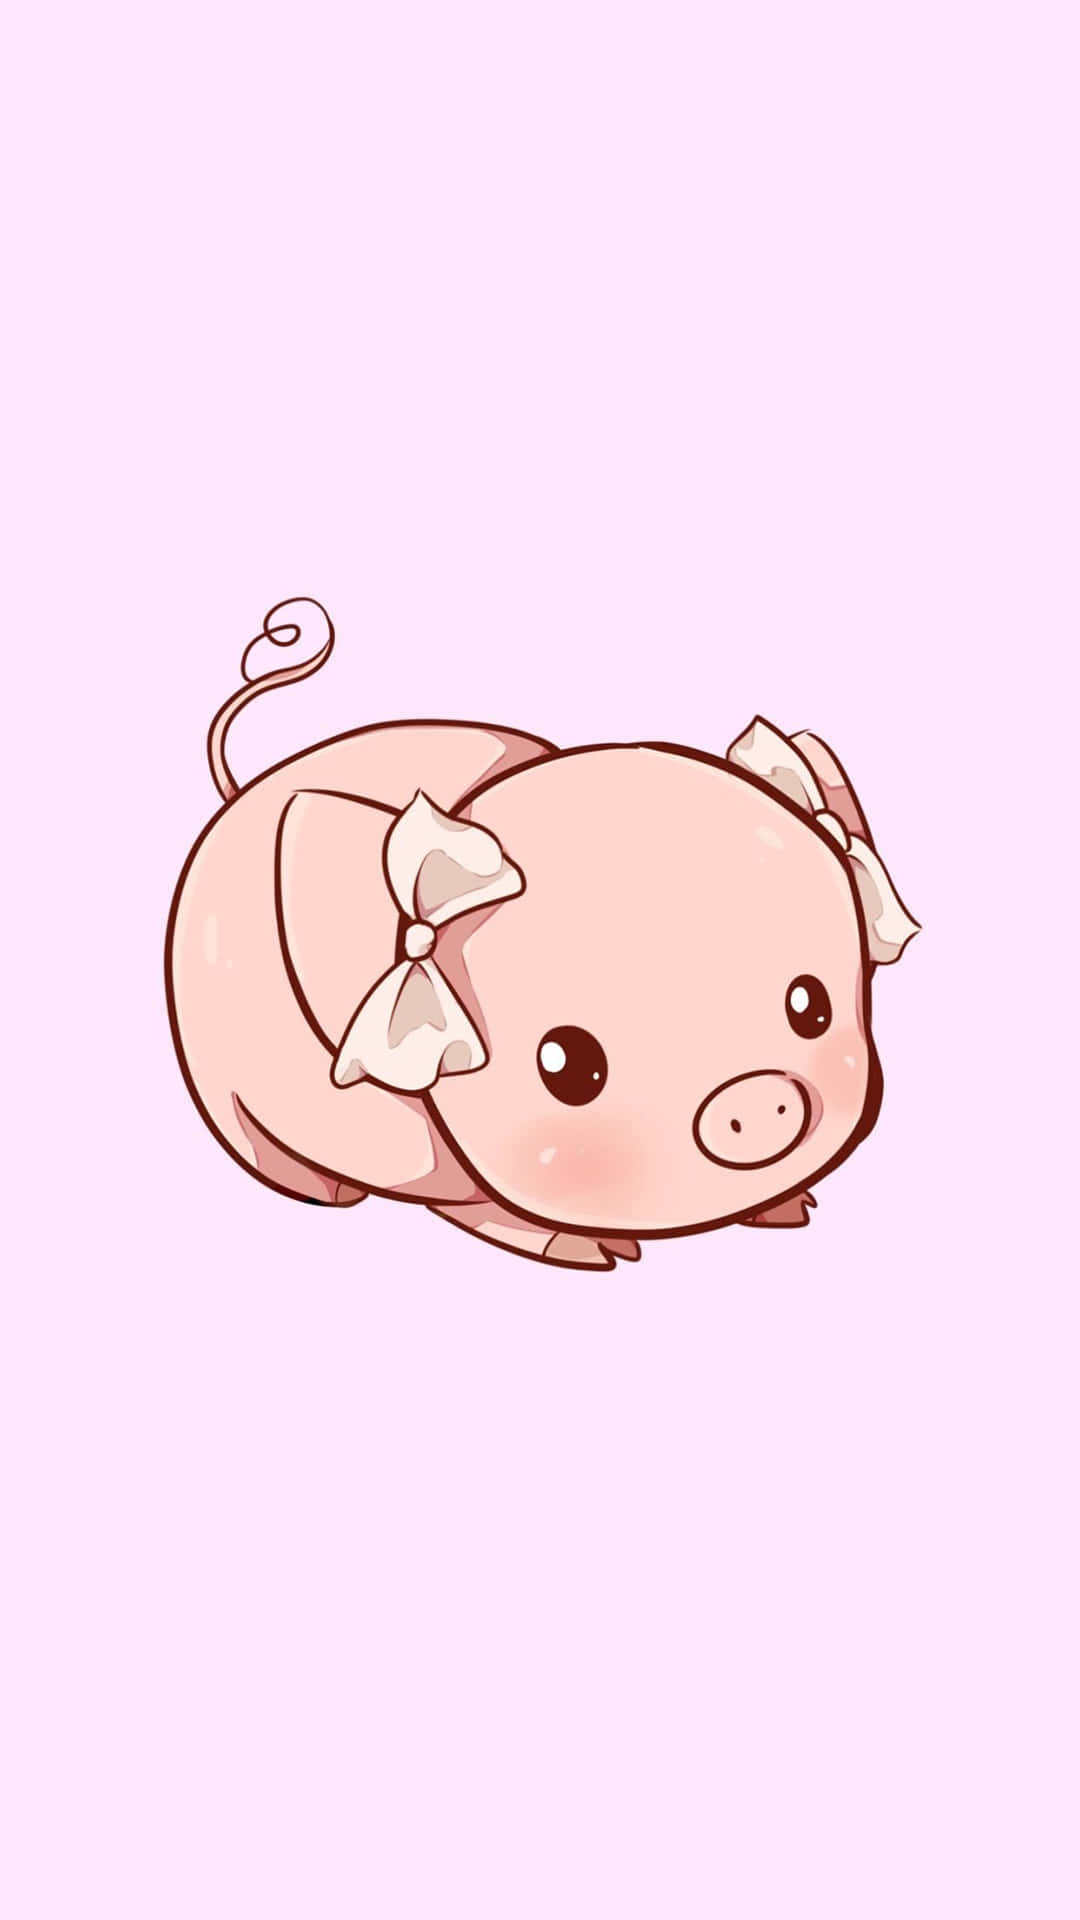 Piglet is Adorably Cute